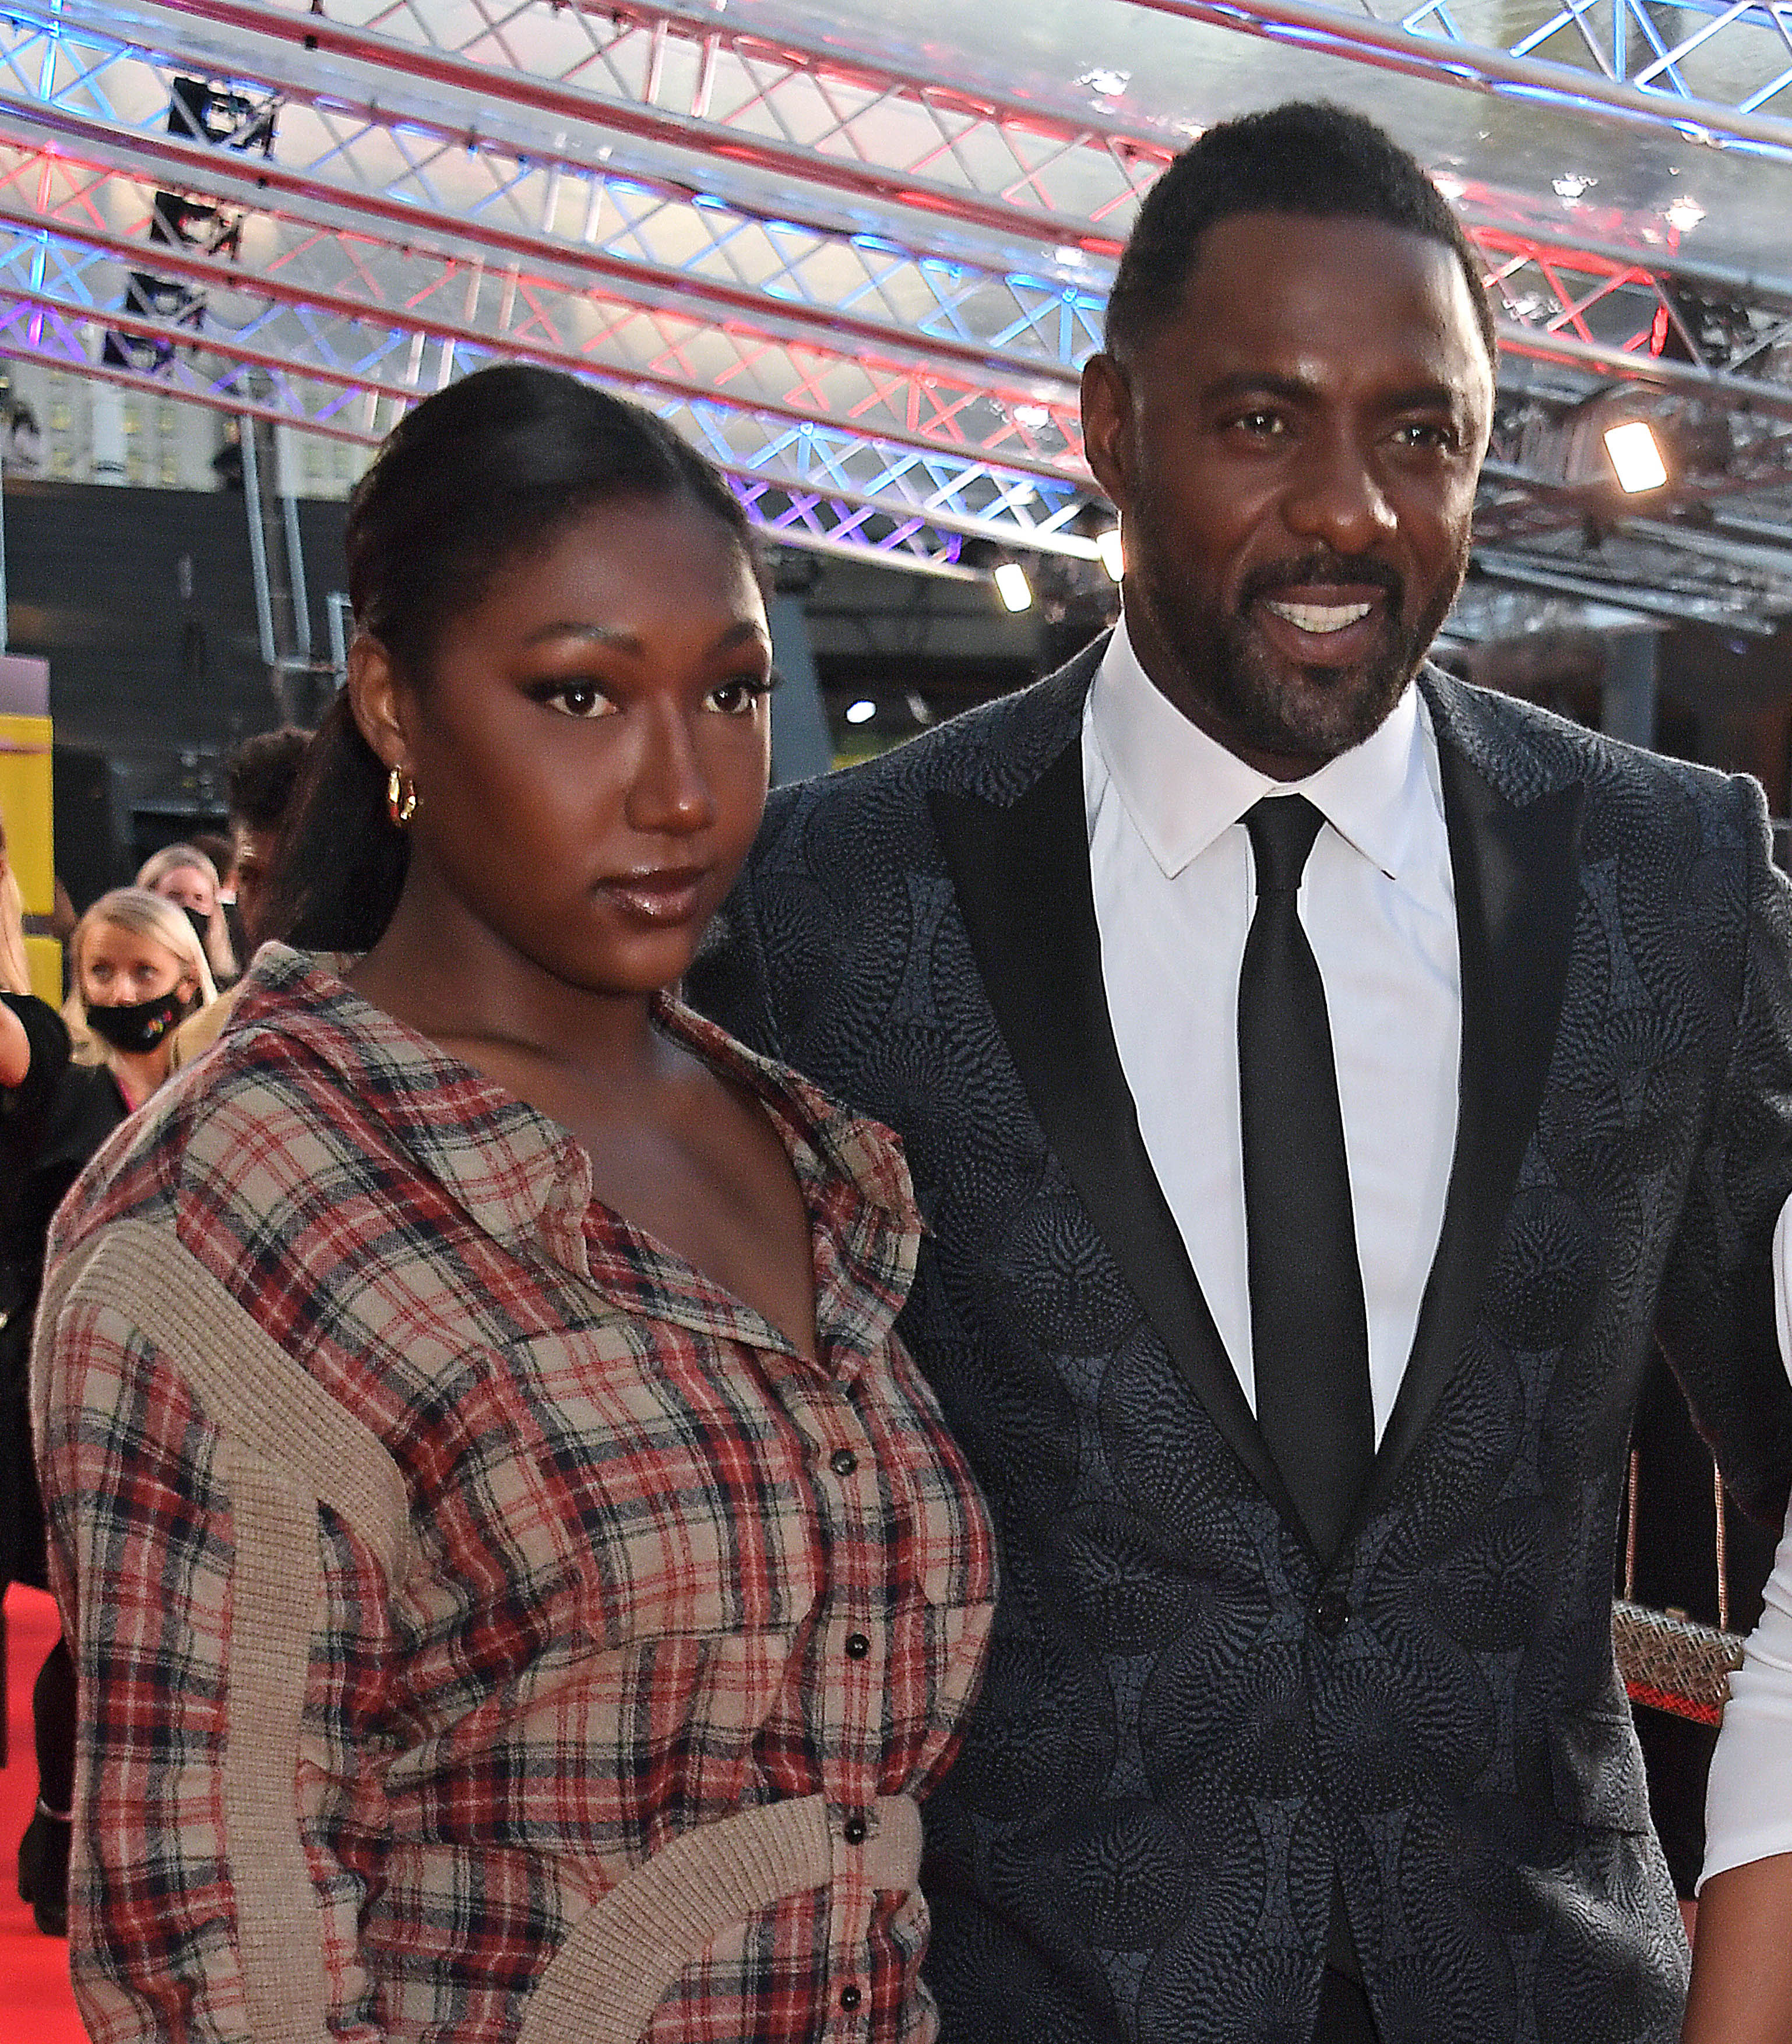 <p>Isan Elba (who was born in 2002) joined dad Idris Elba at the Opening Night Gala for "The Harder They Fall" during the 65th BFI London Film Festival at The Royal Festival Hall in London on Oct. 6, 2021. Isan is no stranger to the spotlight: She served as <a href="https://www.wonderwall.com/awards-events/golden-globes/2019-golden-globe-awards-what-has-everyone-talking-whats-buzzing-trending-3017907.gallery?photoId=1043942">the 2019 Golden Globes Ambassador</a> (which was previously known as Miss Golden Globe).</p>